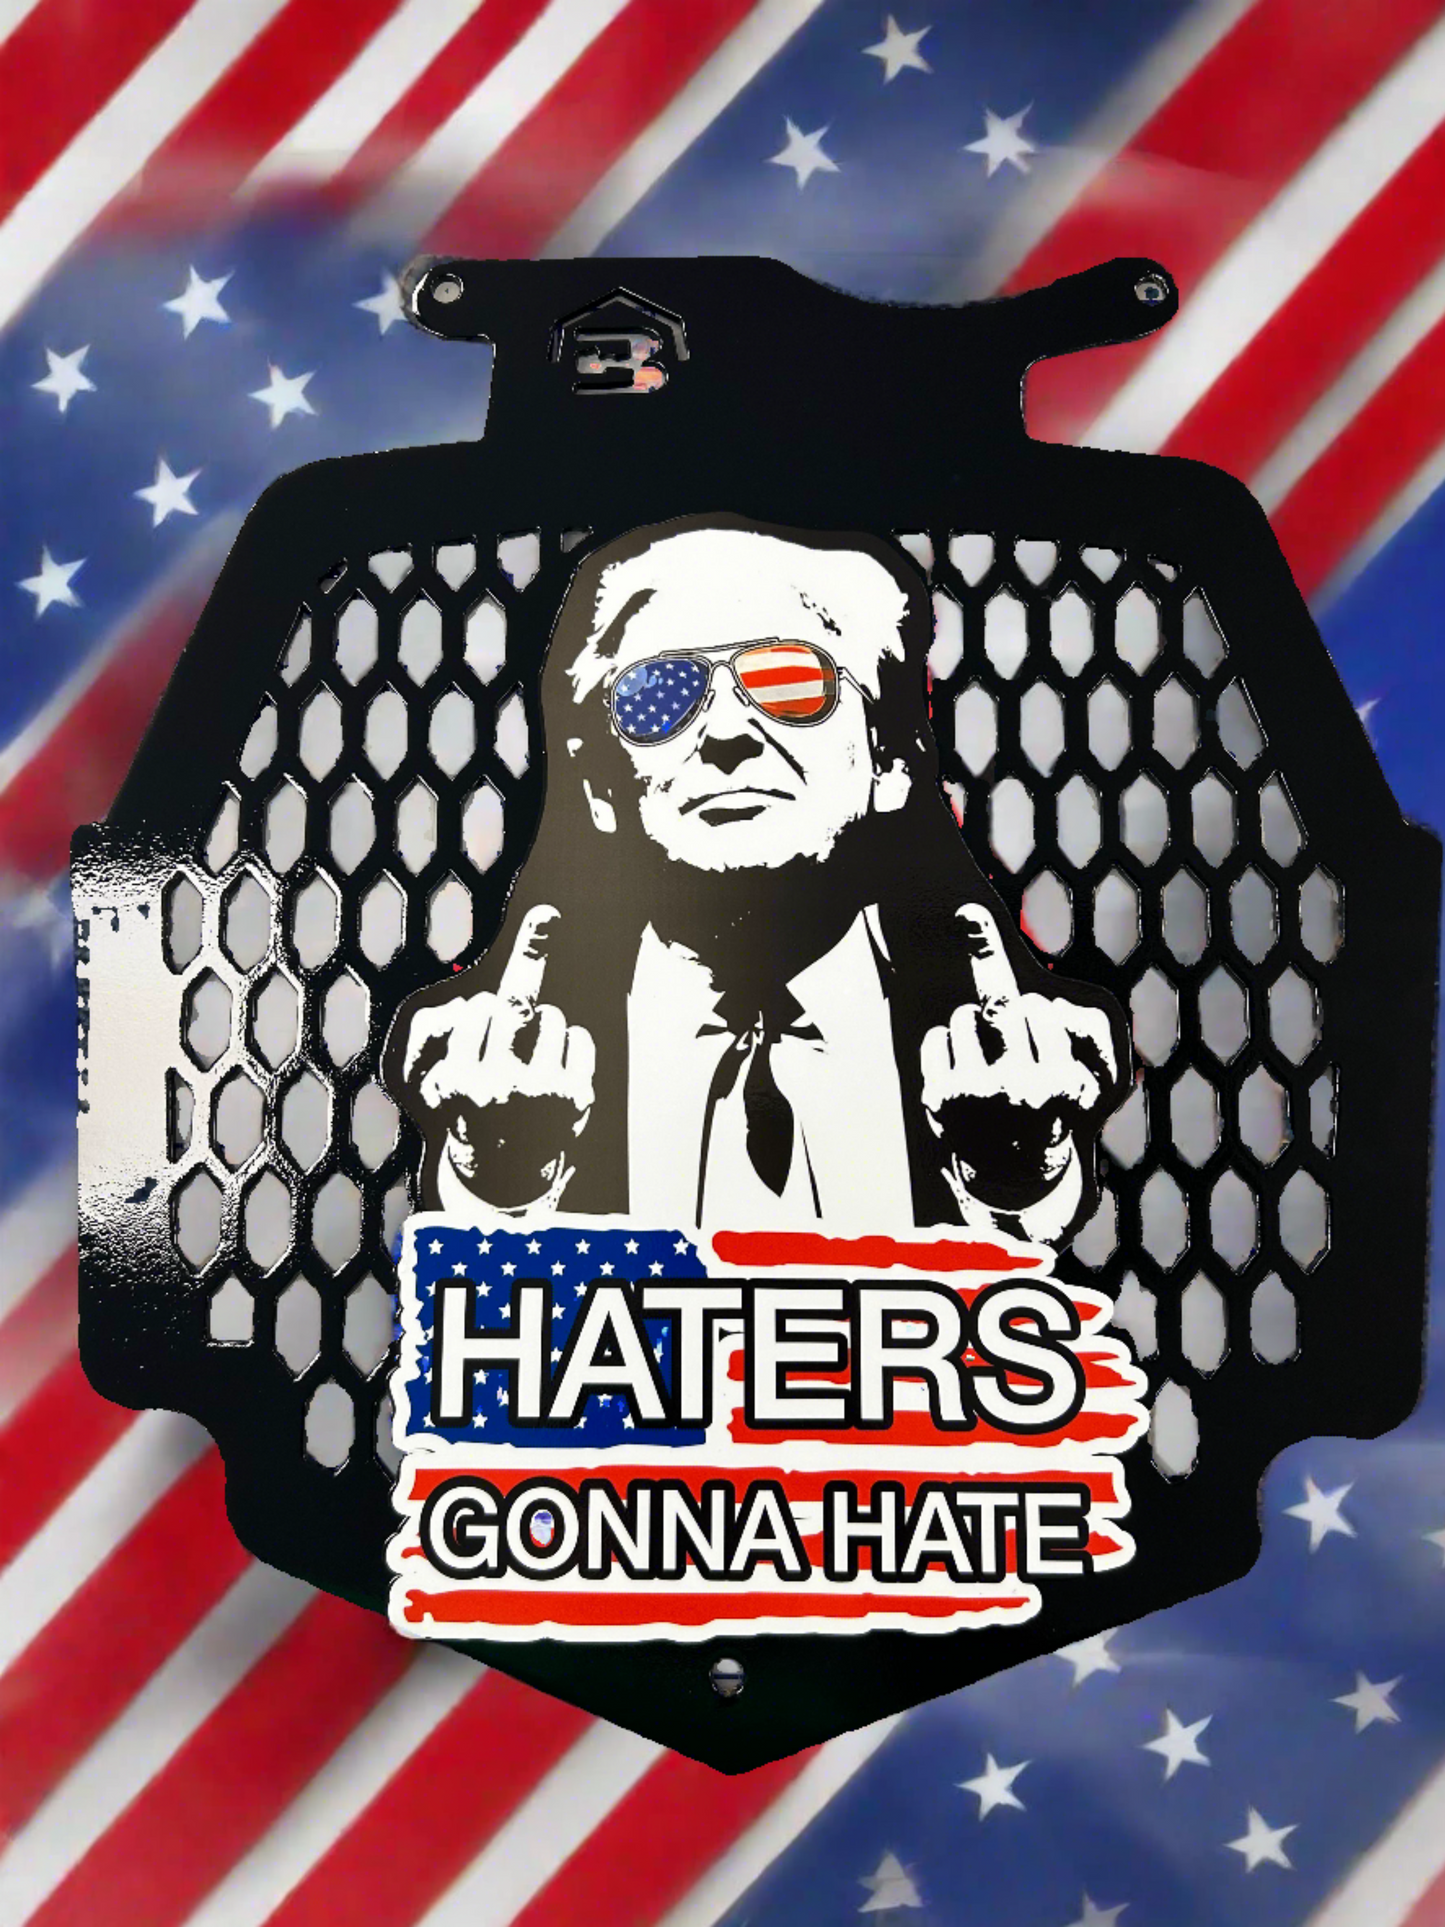 Haters Gonna Hate Radiator cover fits Can Am Outlander Max XMR 450 570 650 850 1000 - Your Color Choices